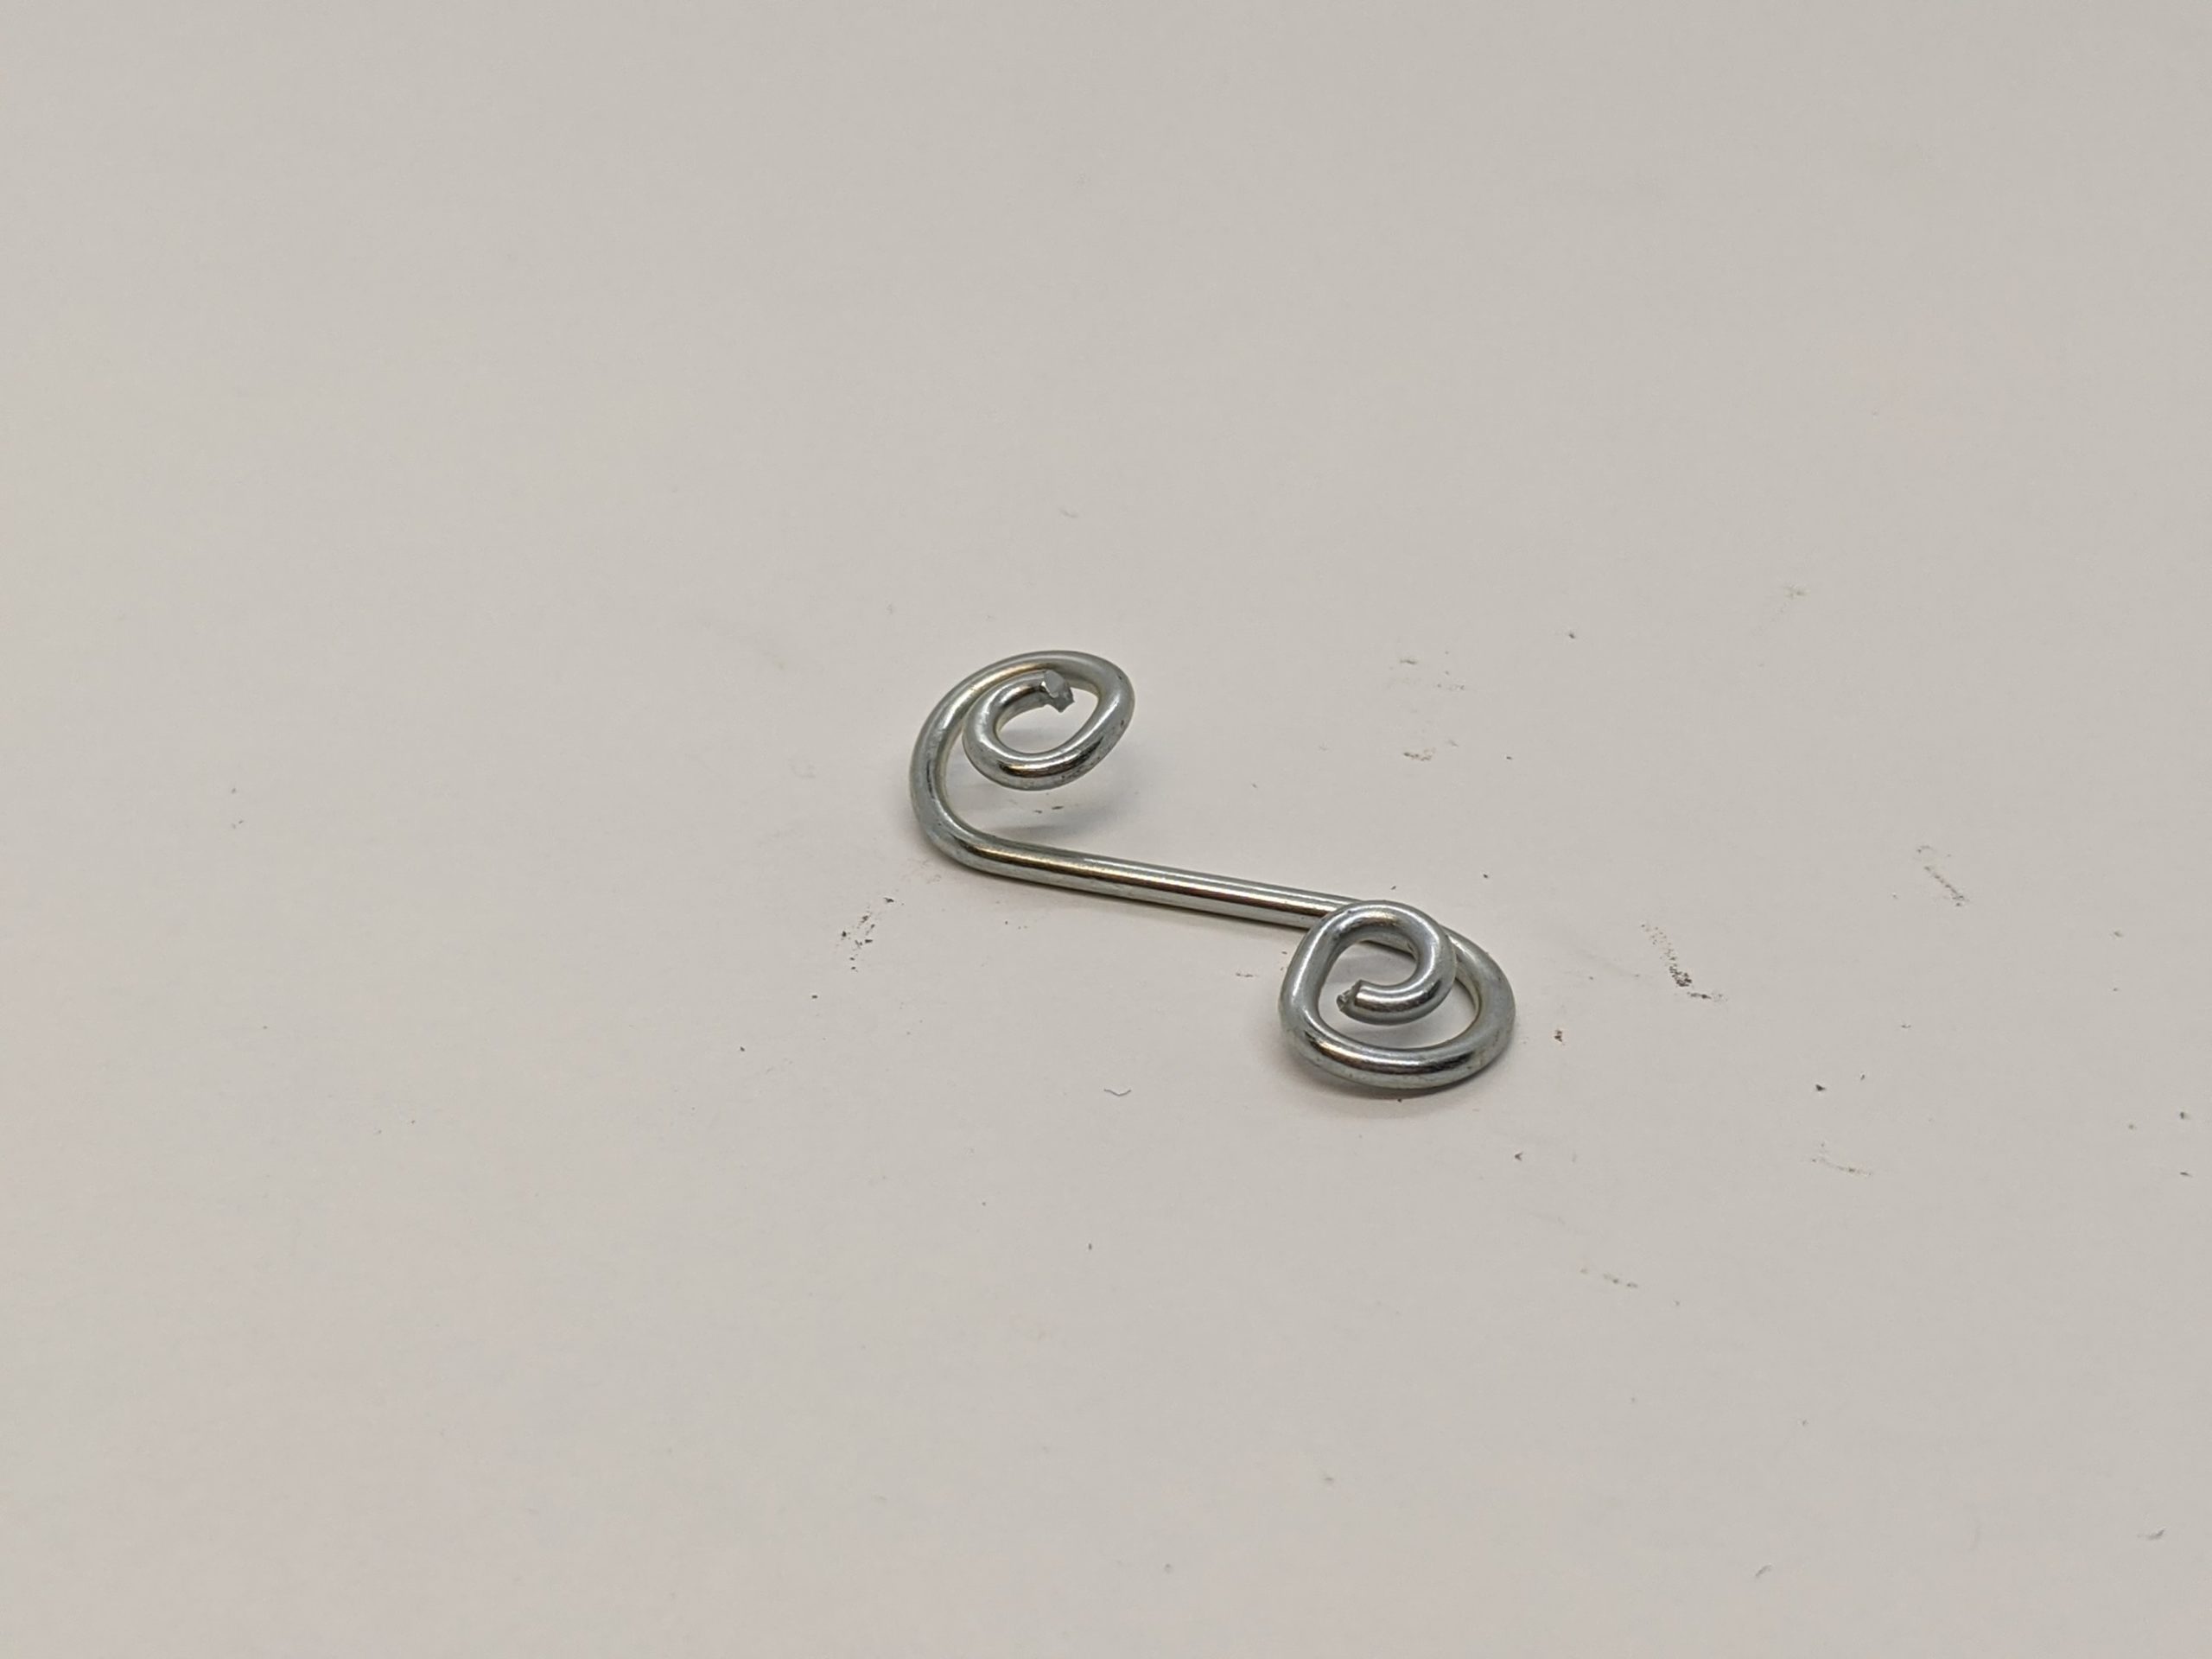 061676 Dzus Fastener “S” Clip – Morrie's Place Cycle